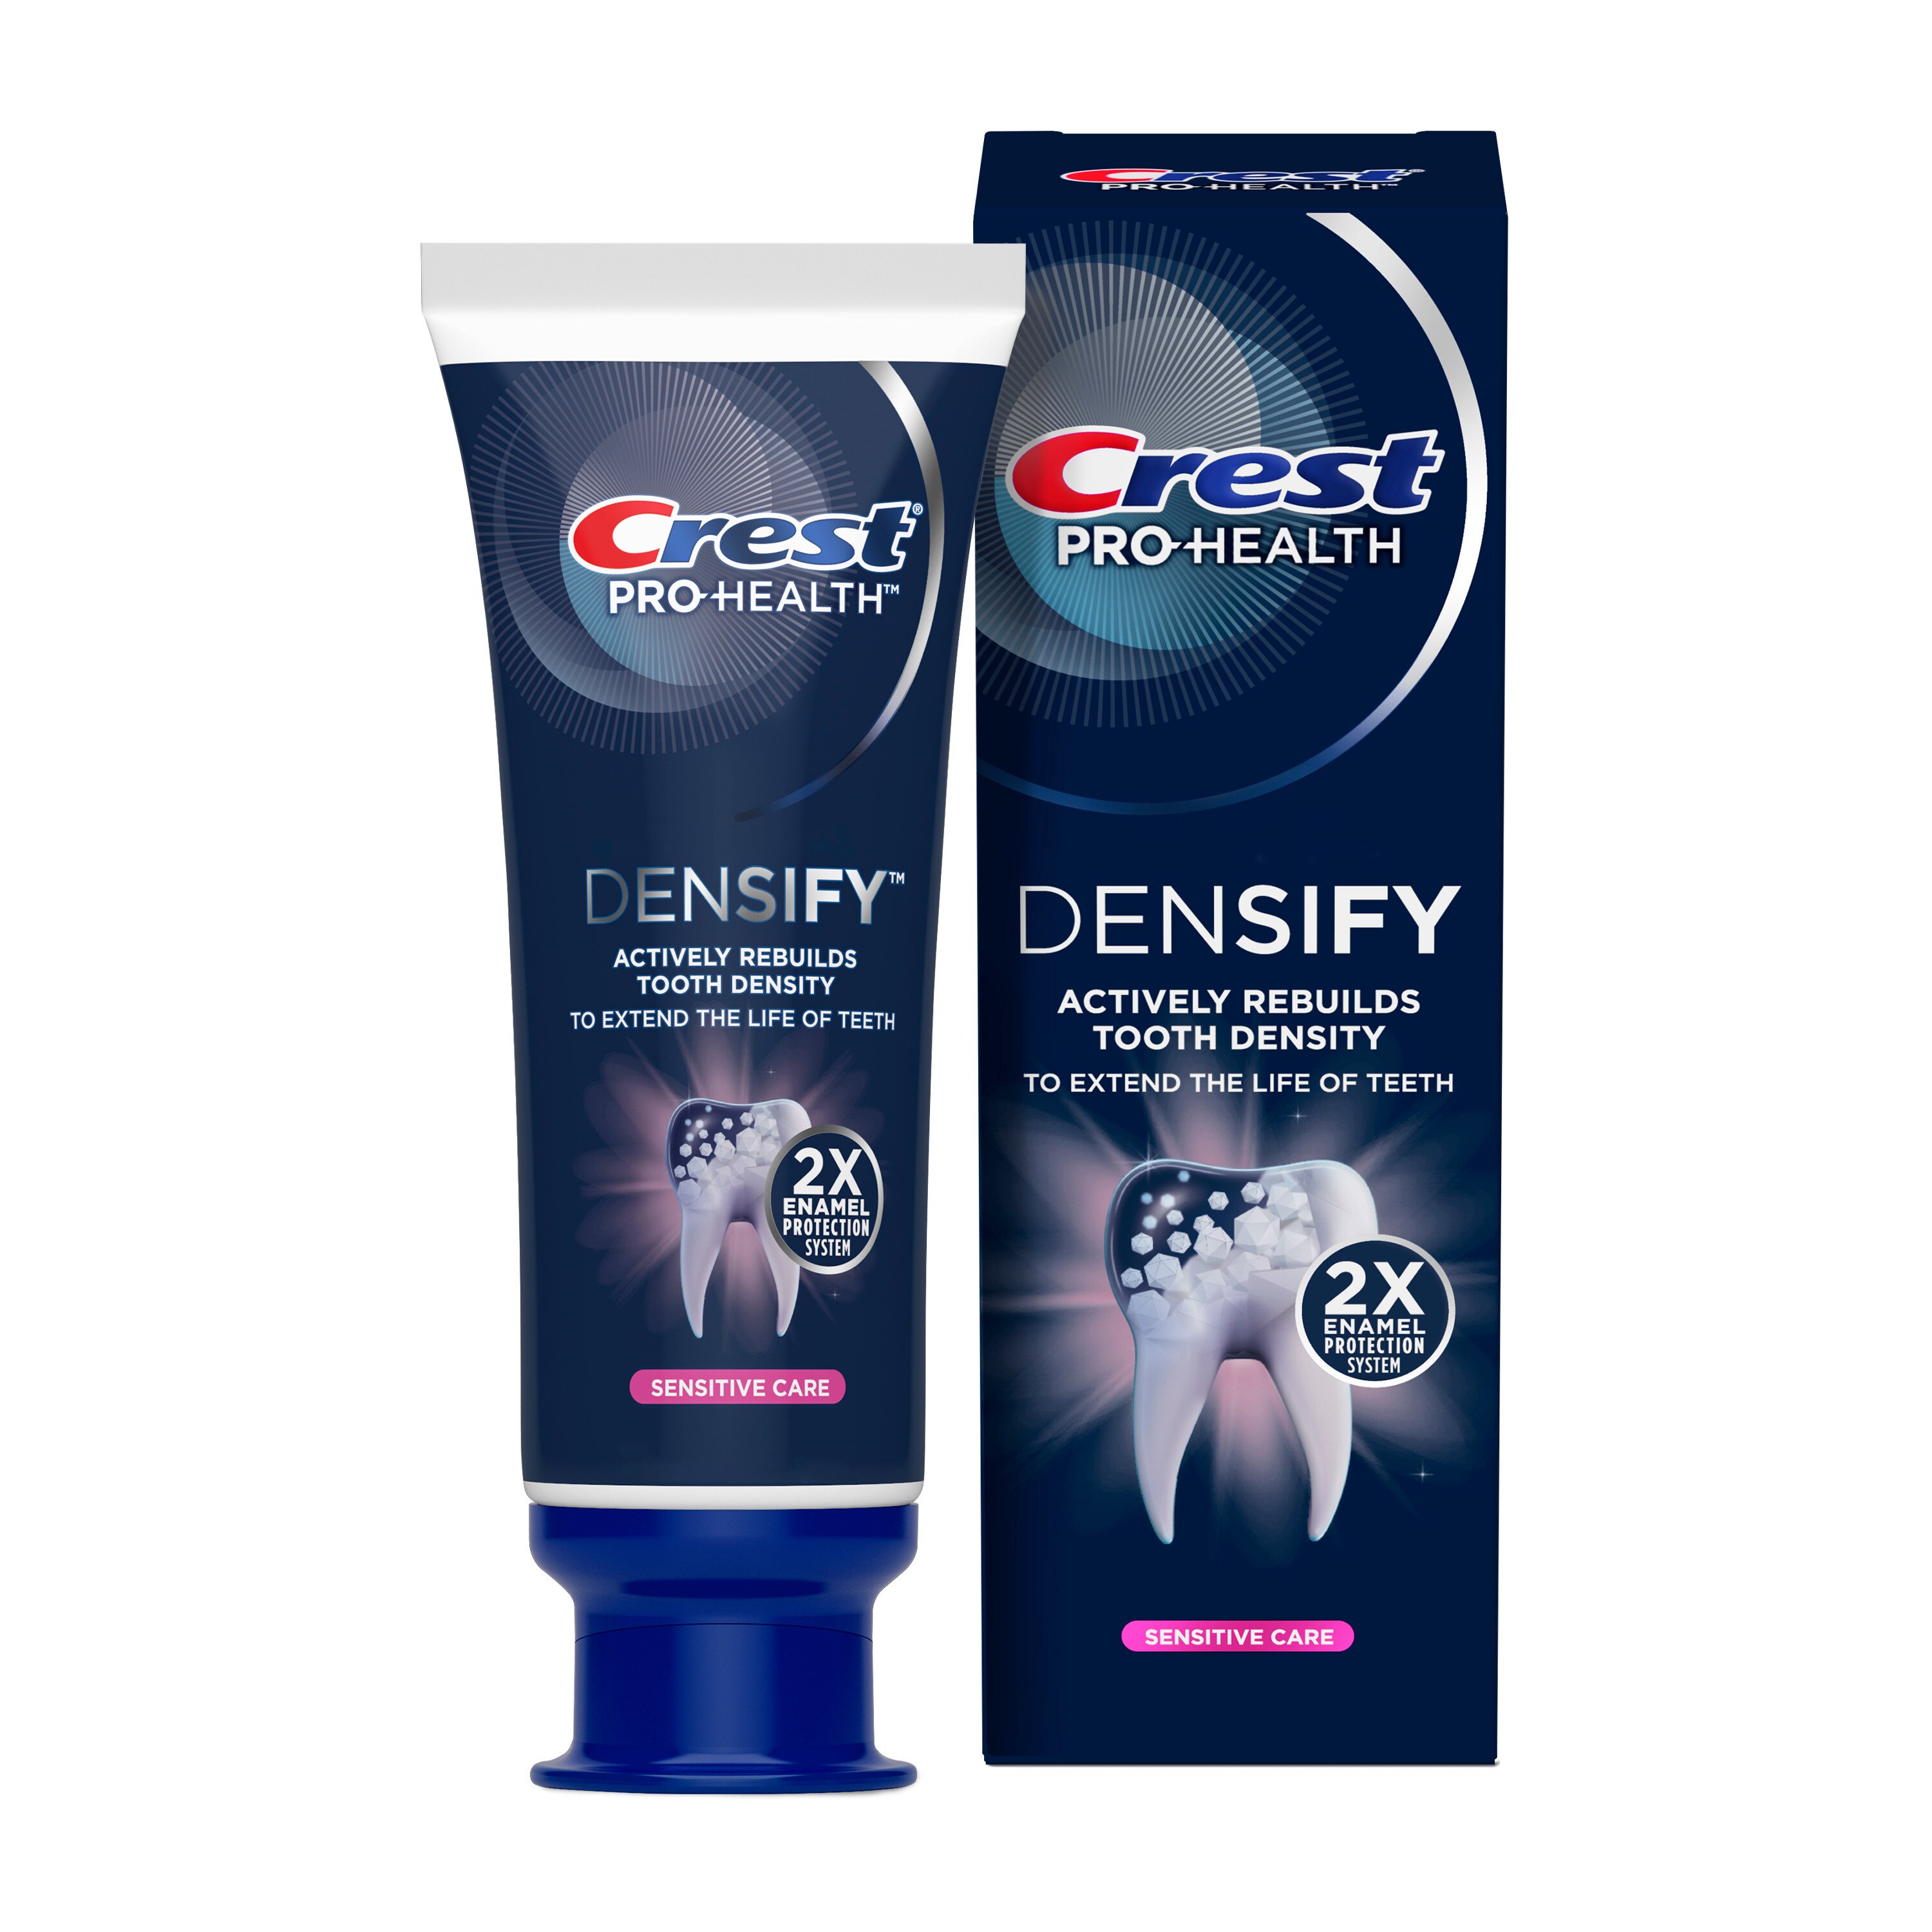 Crest Pro-Health Densify Fluoride Toothpaste For Anticavity And Sensitive Teeth, 2x Enamel Protection System, Sensitive Care, 4.1 Oz , CVS